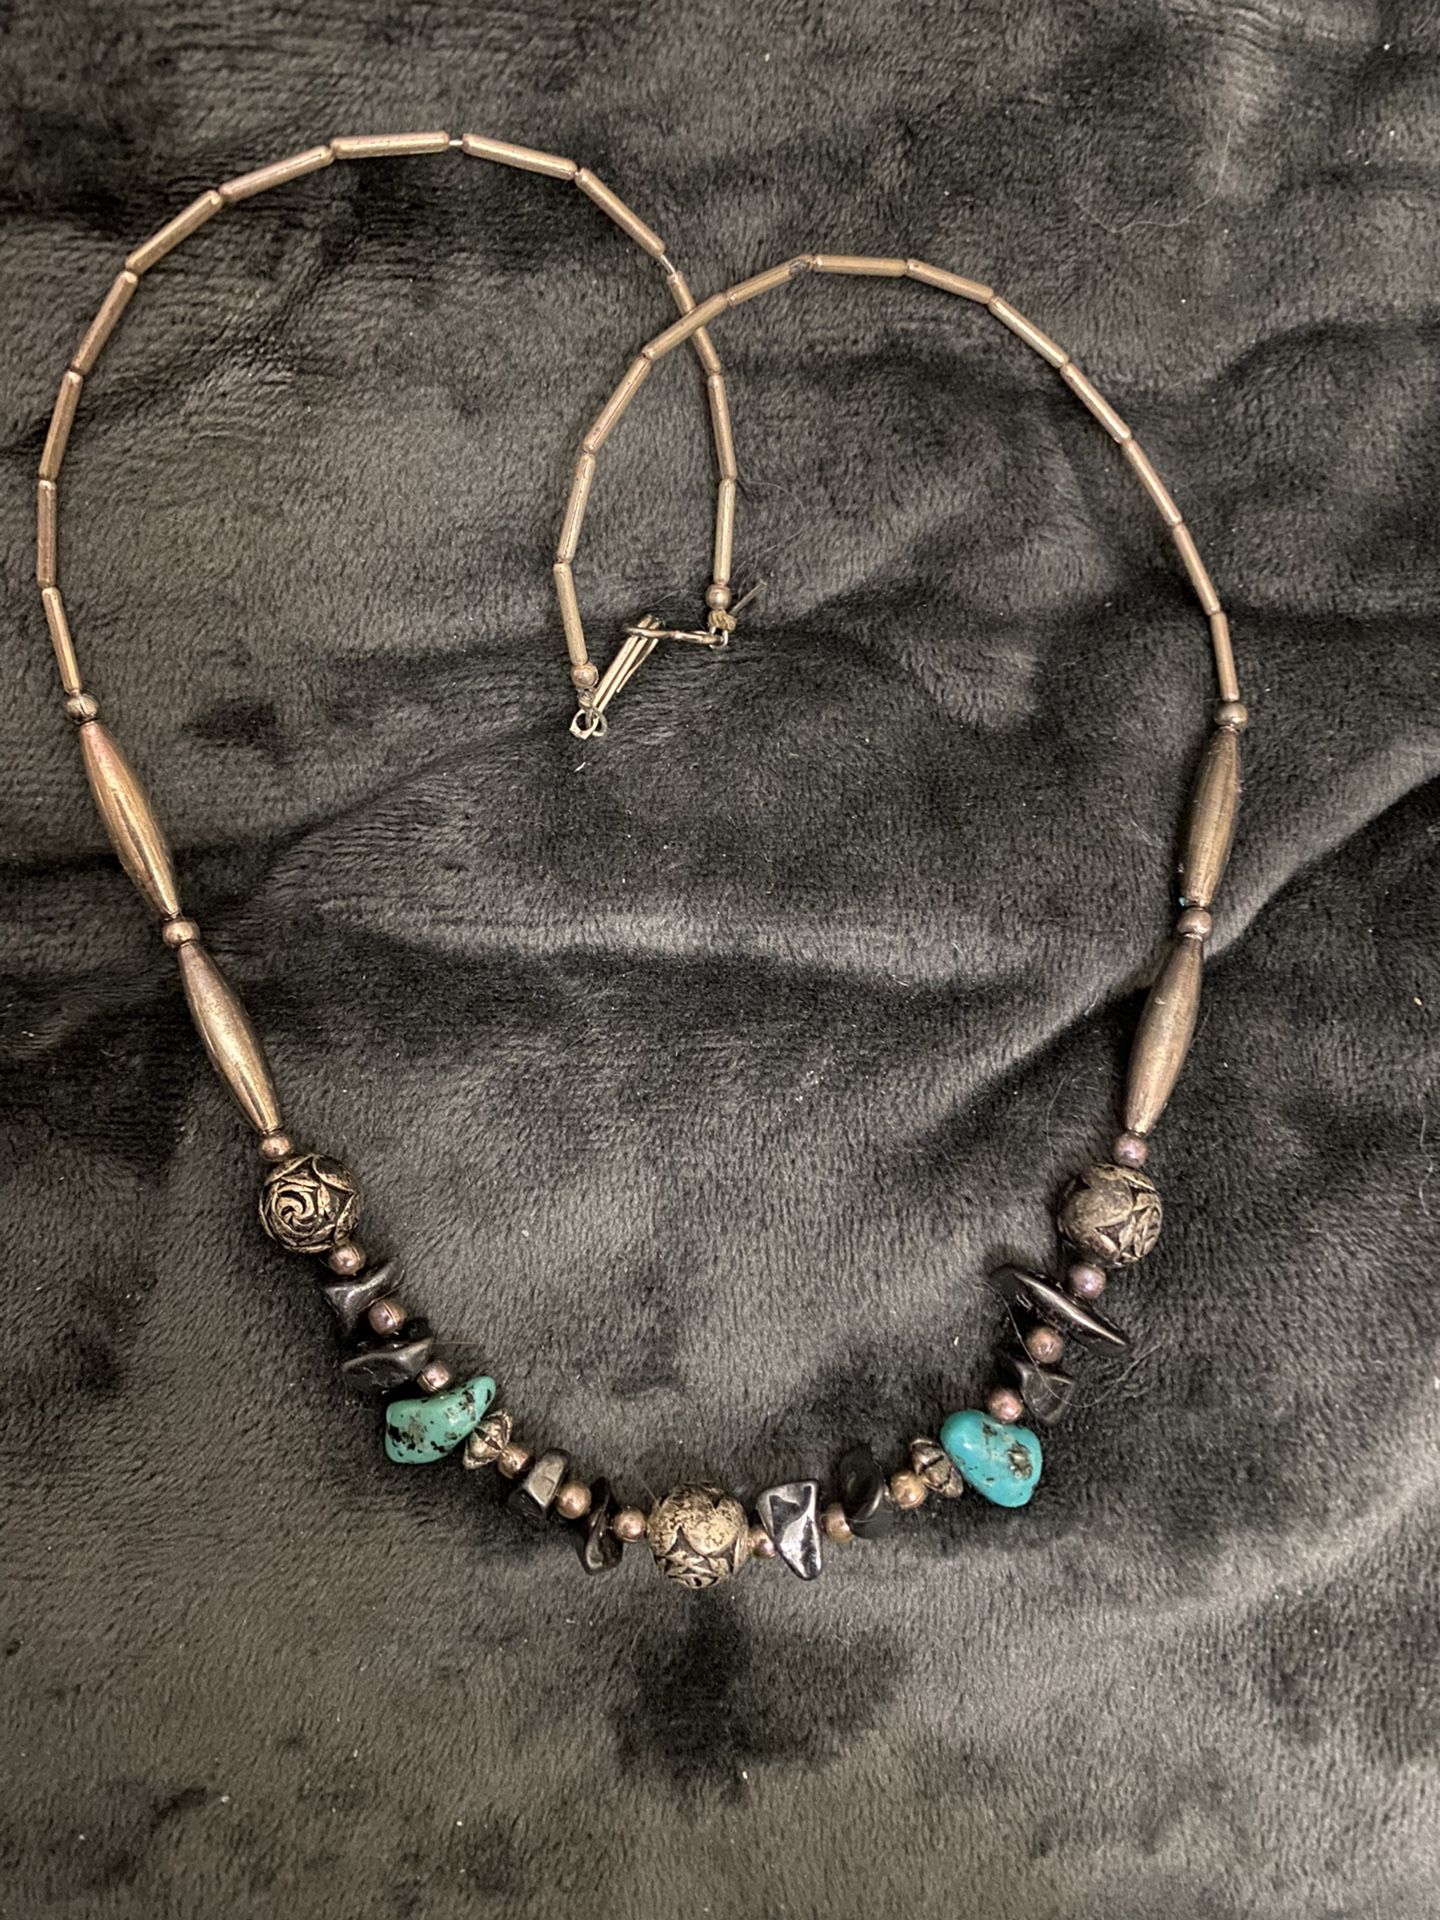 Vintage Handmade Silver, Turquoise And Obsidian 16” Necklace